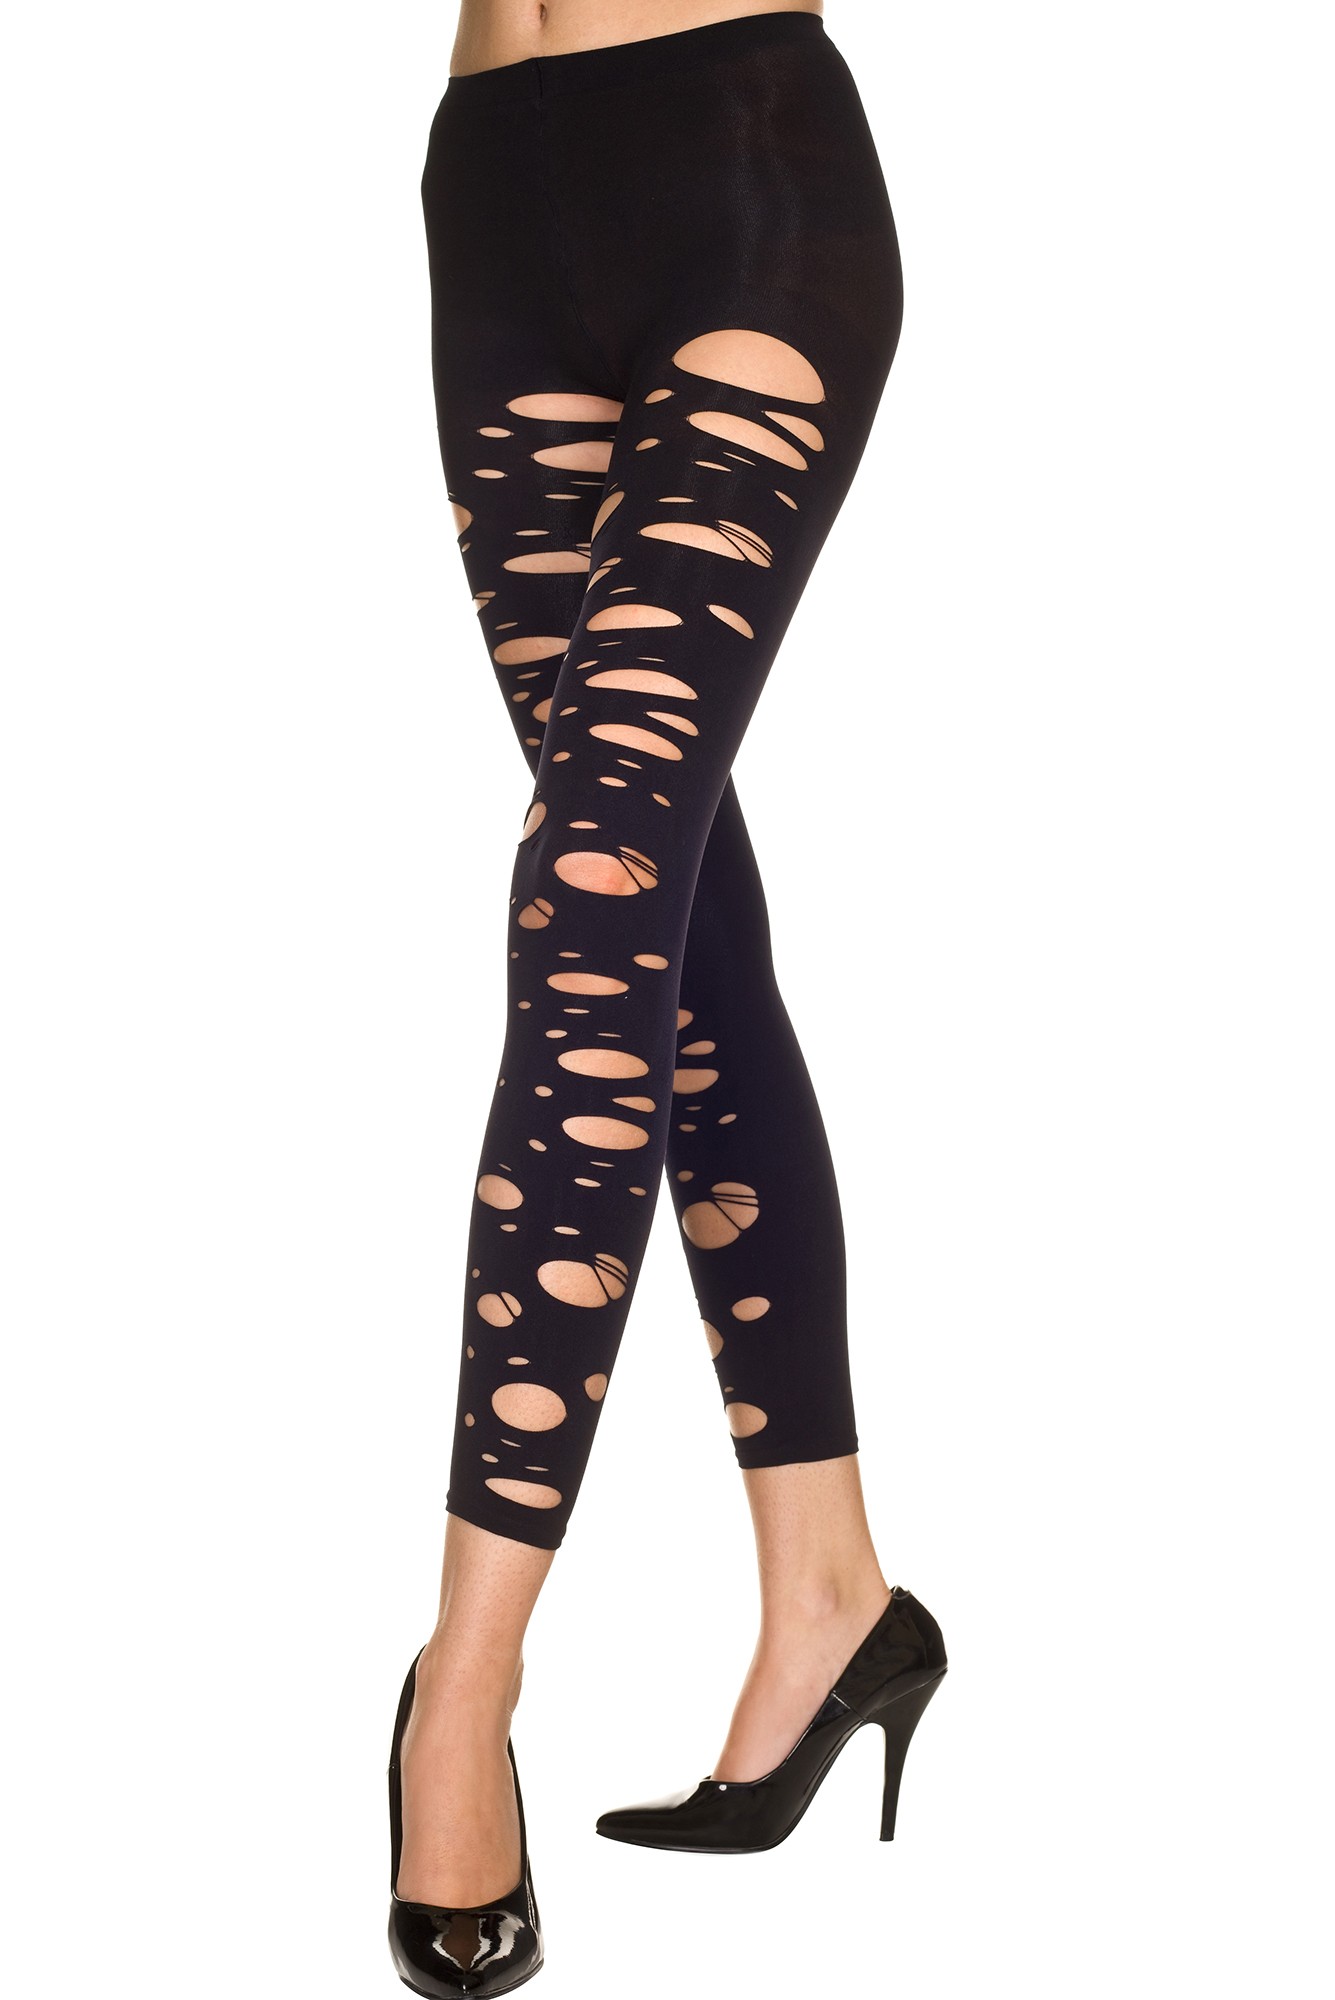 Adult Tattered Stirrup Opaque Spandex Leggings | $9.99 | The Costume Land